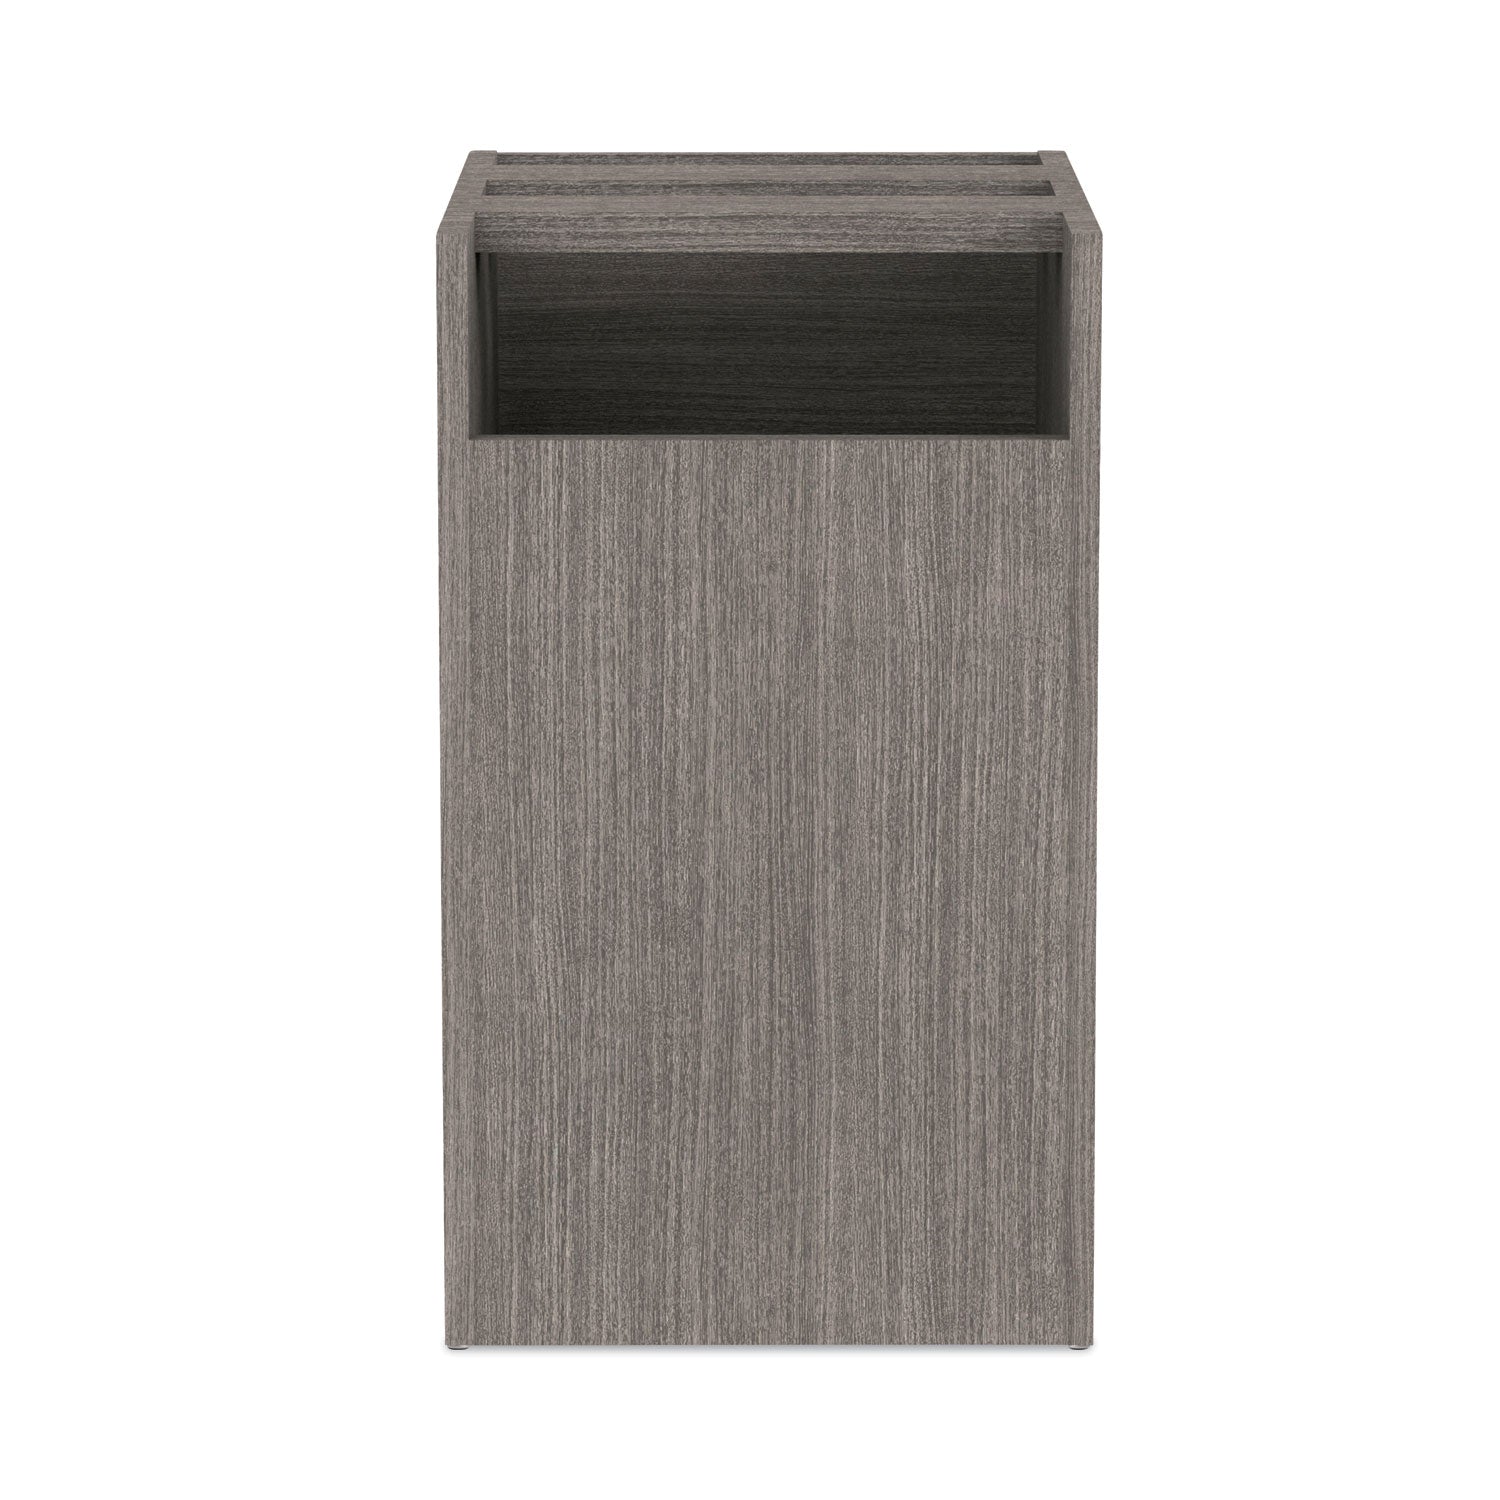 alera-valencia-series-full-pedestal-file-left-or-right-2-legal-letter-size-file-drawers-gray-1563-x-205-x-285_aleva542822gy - 5